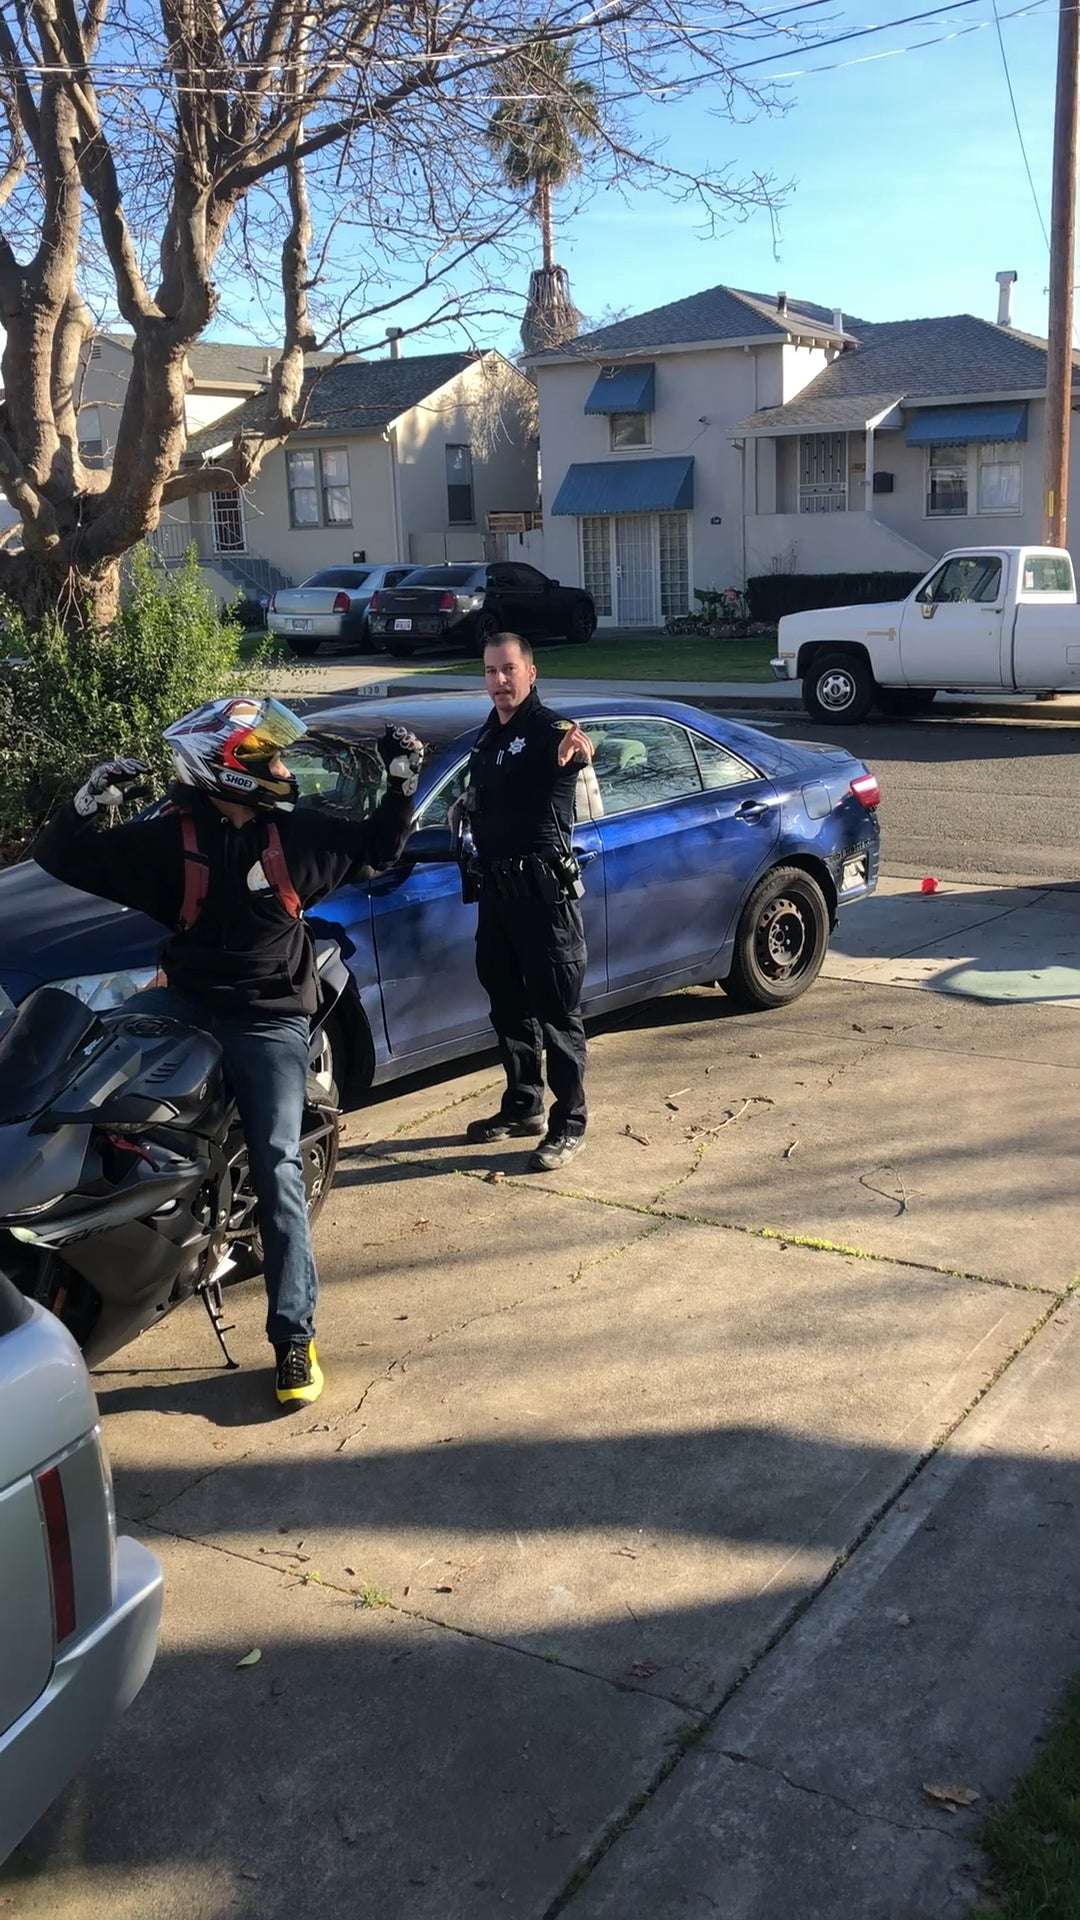 image for Veteran assaulted and given concussion for filming officer from his own porch (Jan, 2019) : ActualPublicFreakouts